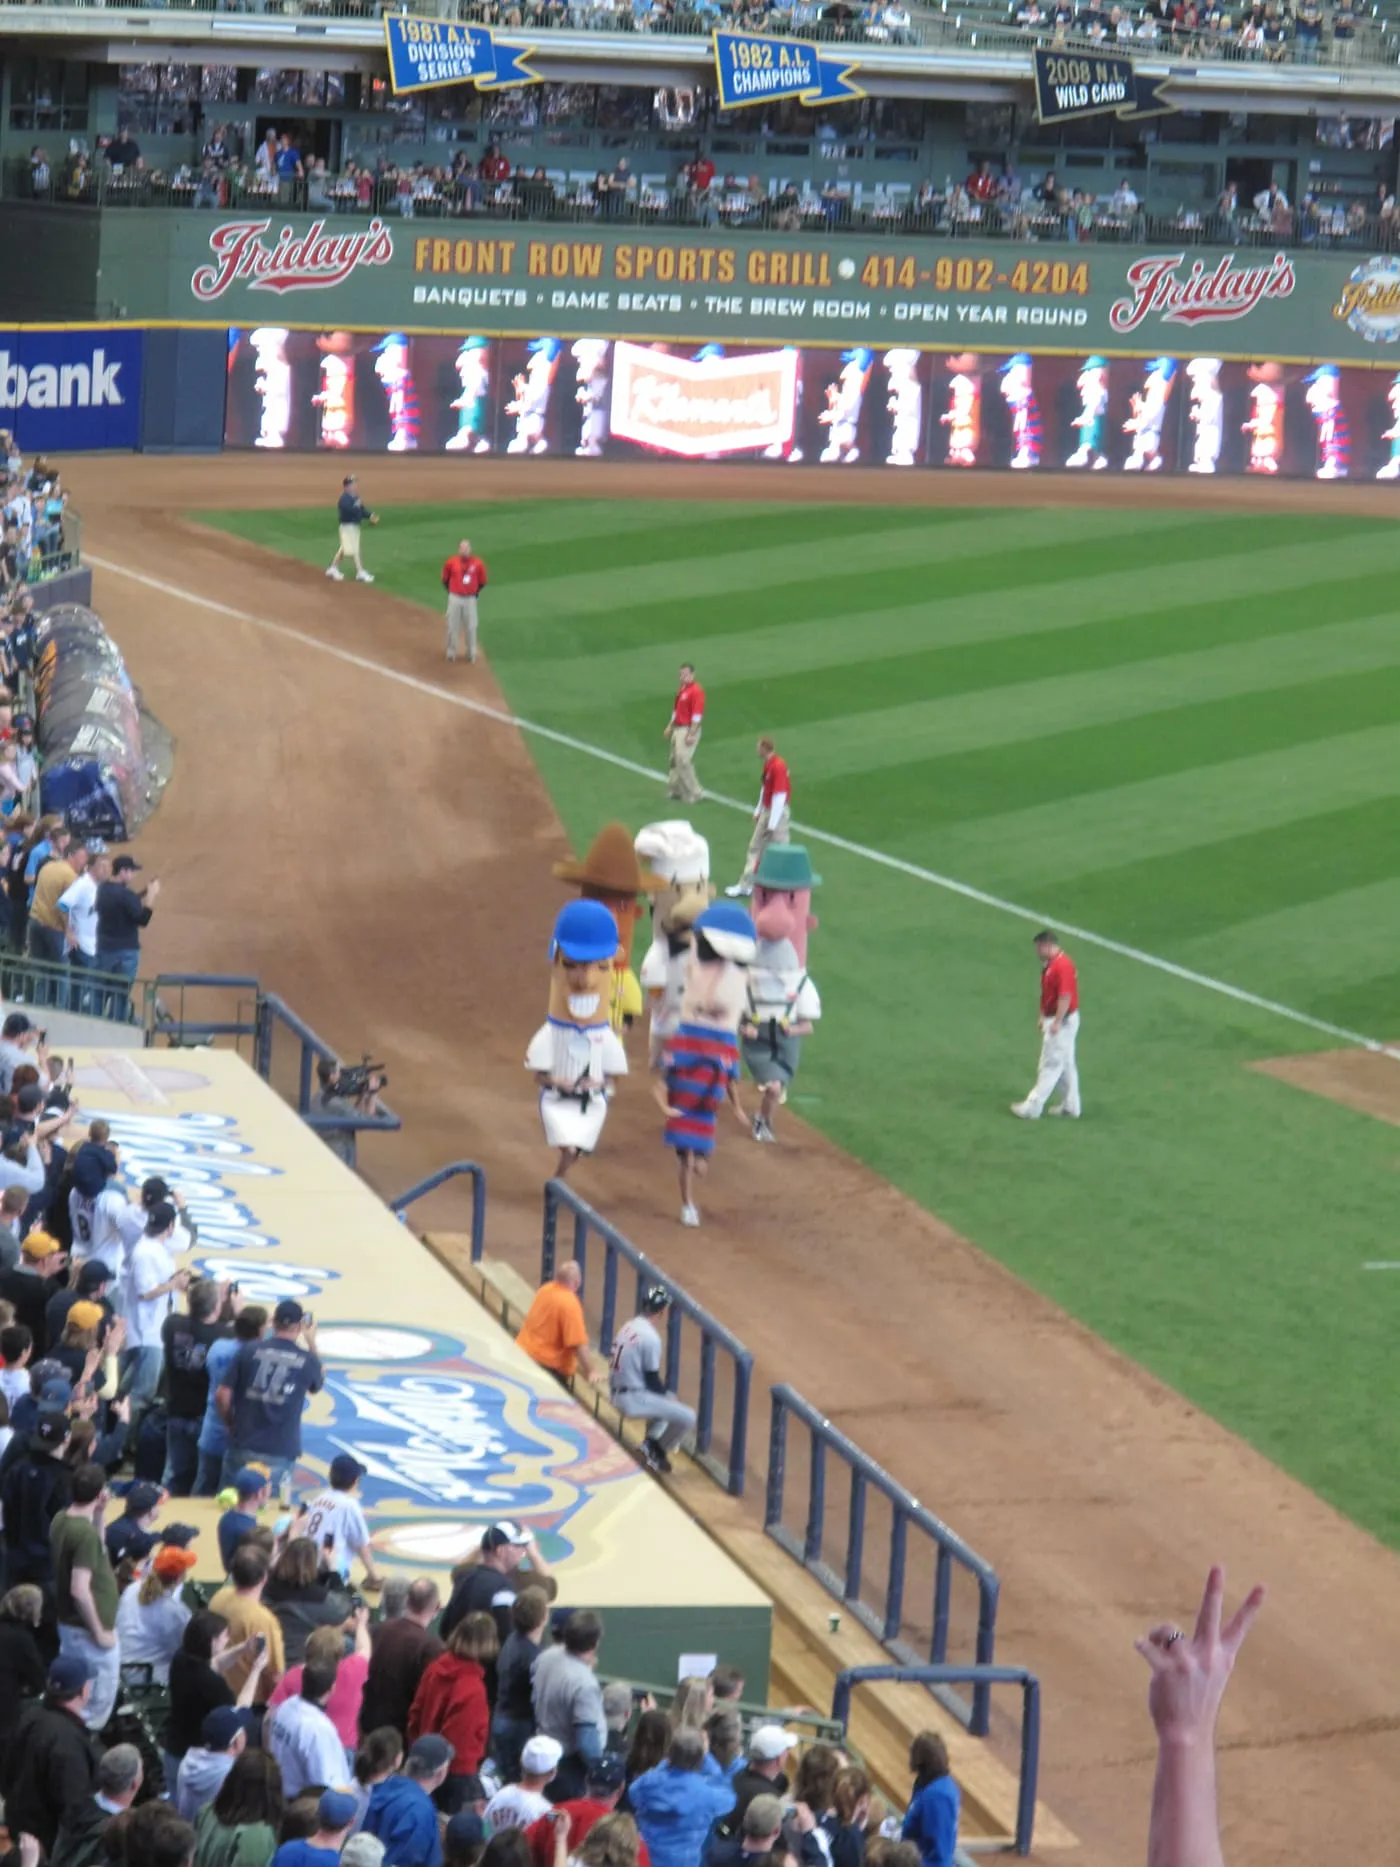 Sausage race at a Brewers game at Millers Park in Milwaukee.